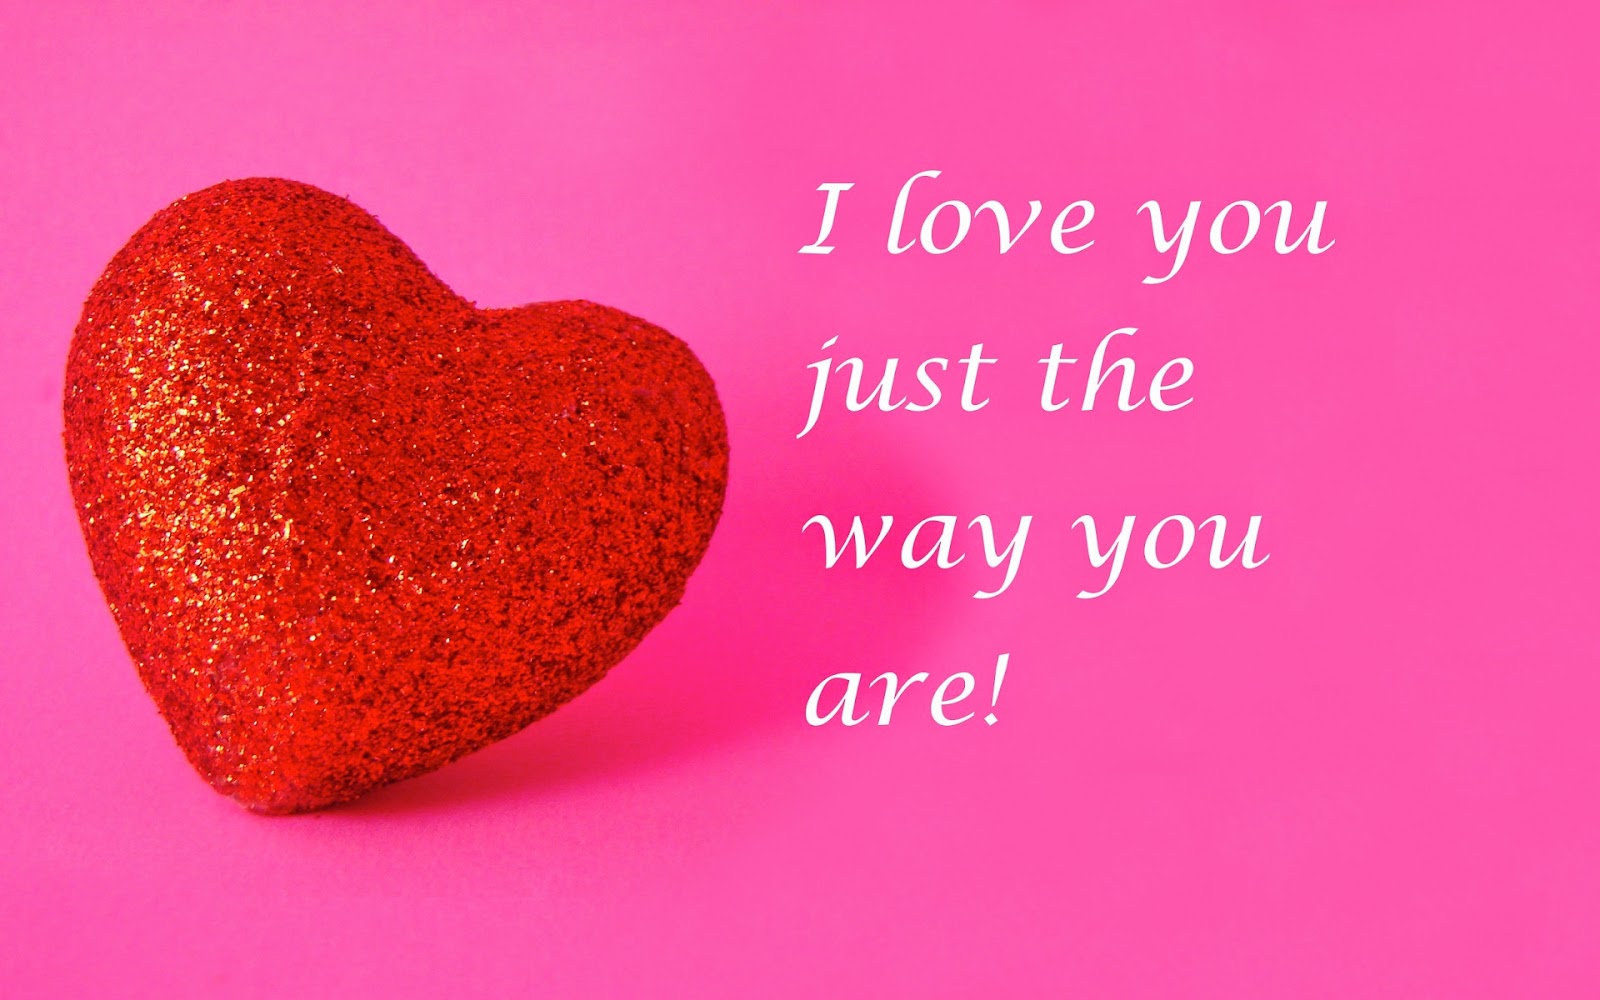 i love you wale wallpaper,heart,love,valentine's day,text,sweetness